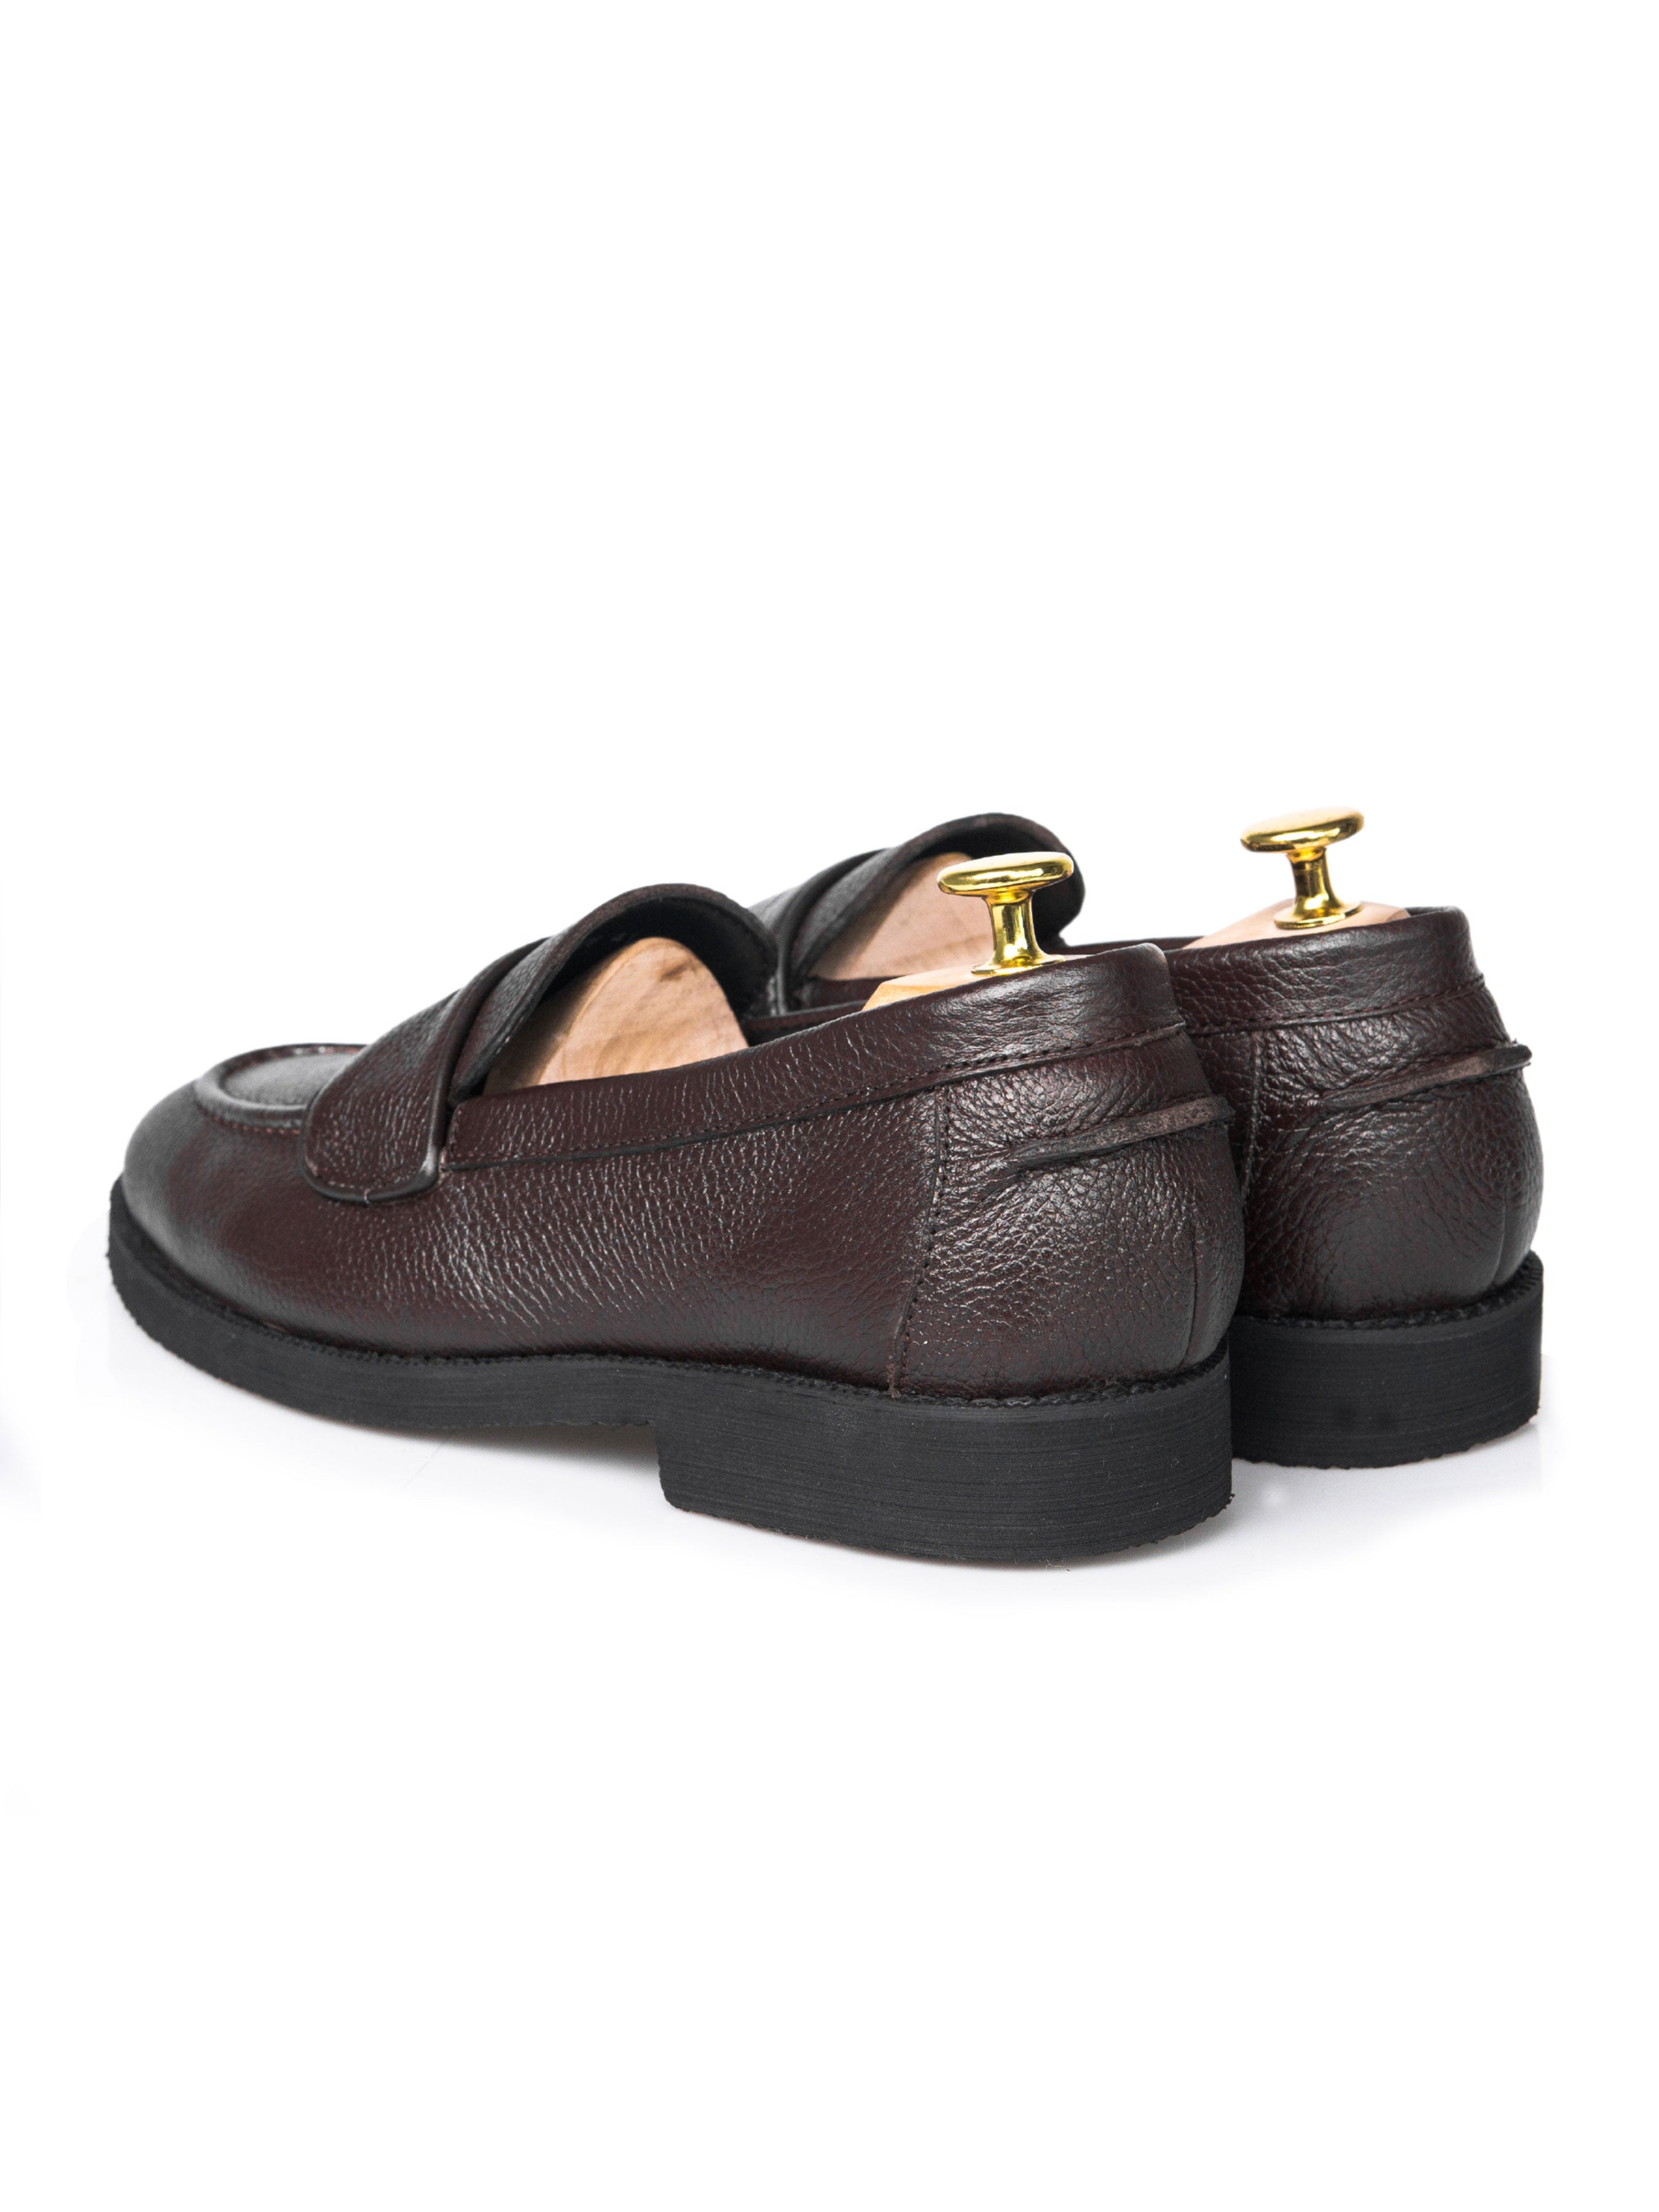 Wayne Penny Loafer - Coffee Pebble Grain Leather (Crepe Sole) - Zeve Shoes